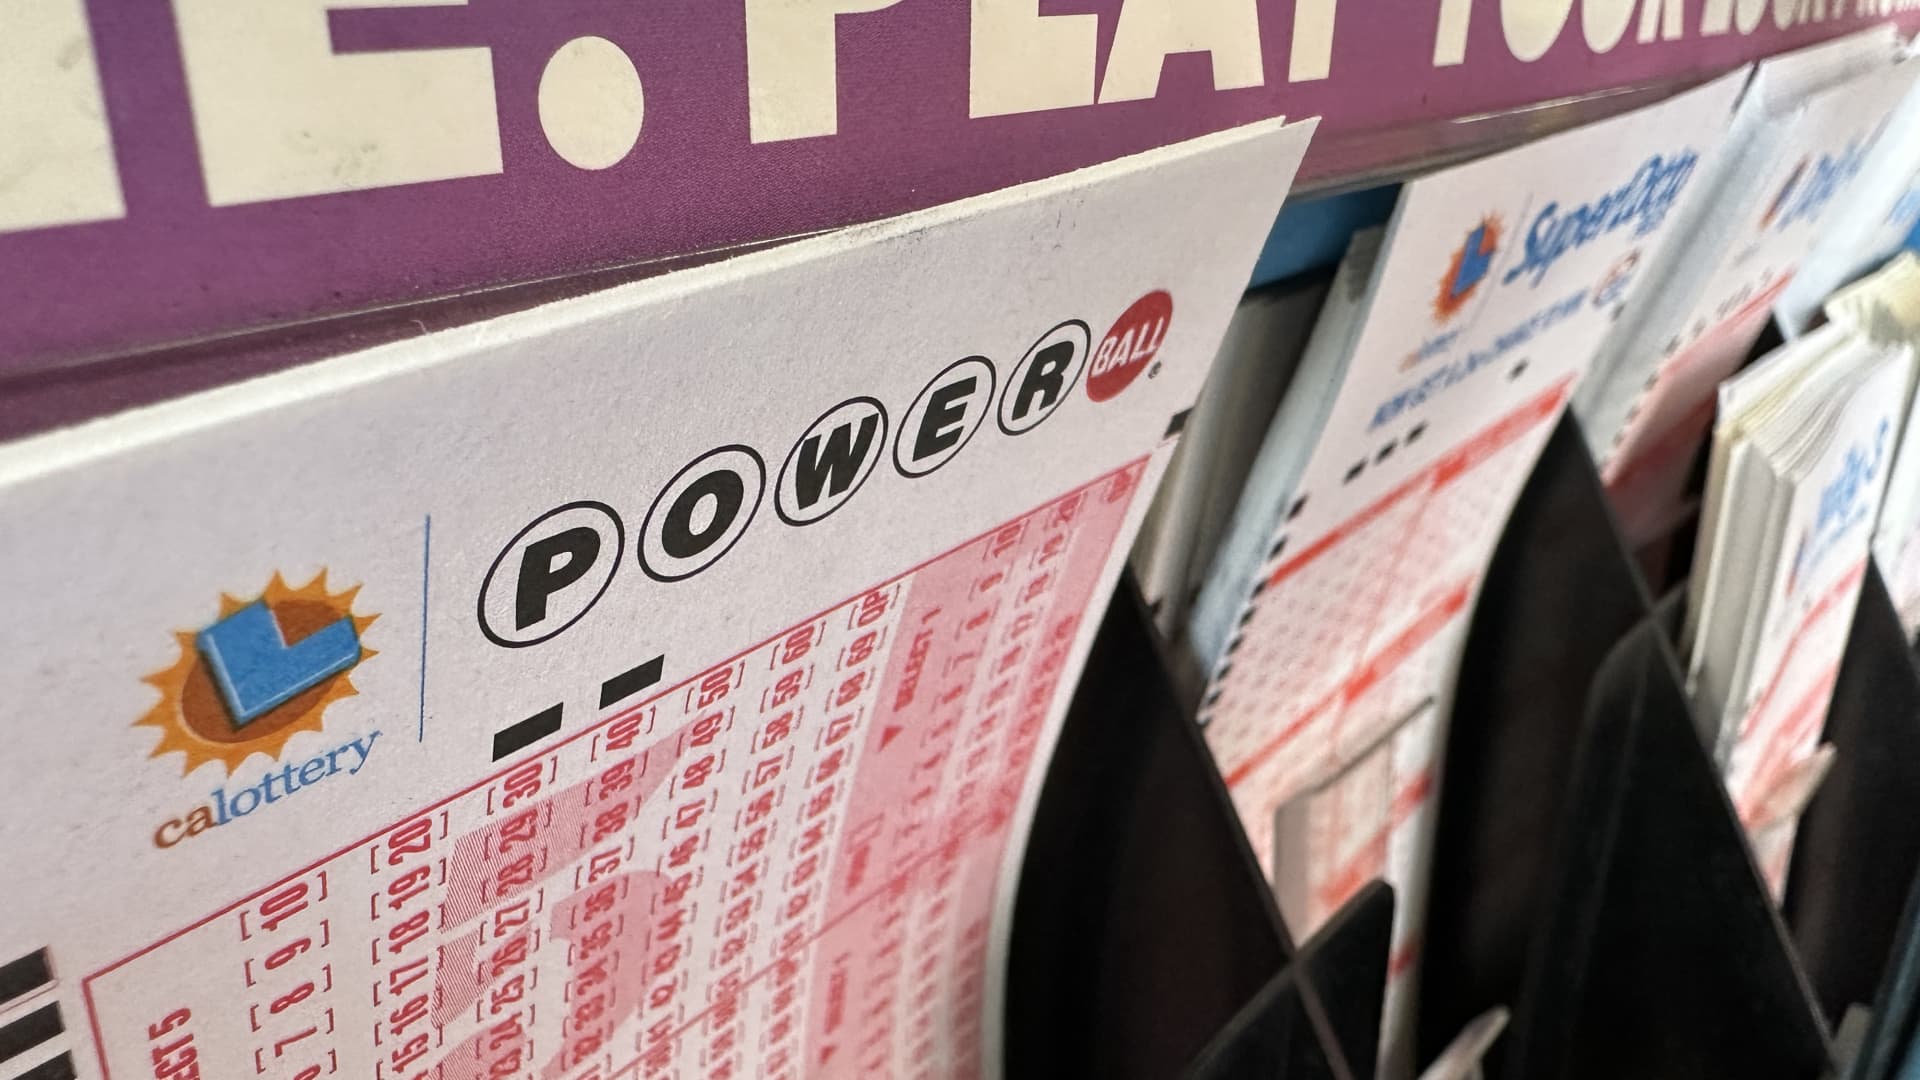 The Powerball jackpot is $1.9 billion only if you take the annuity. Here’s why the lump sum may be overrated – CNBC